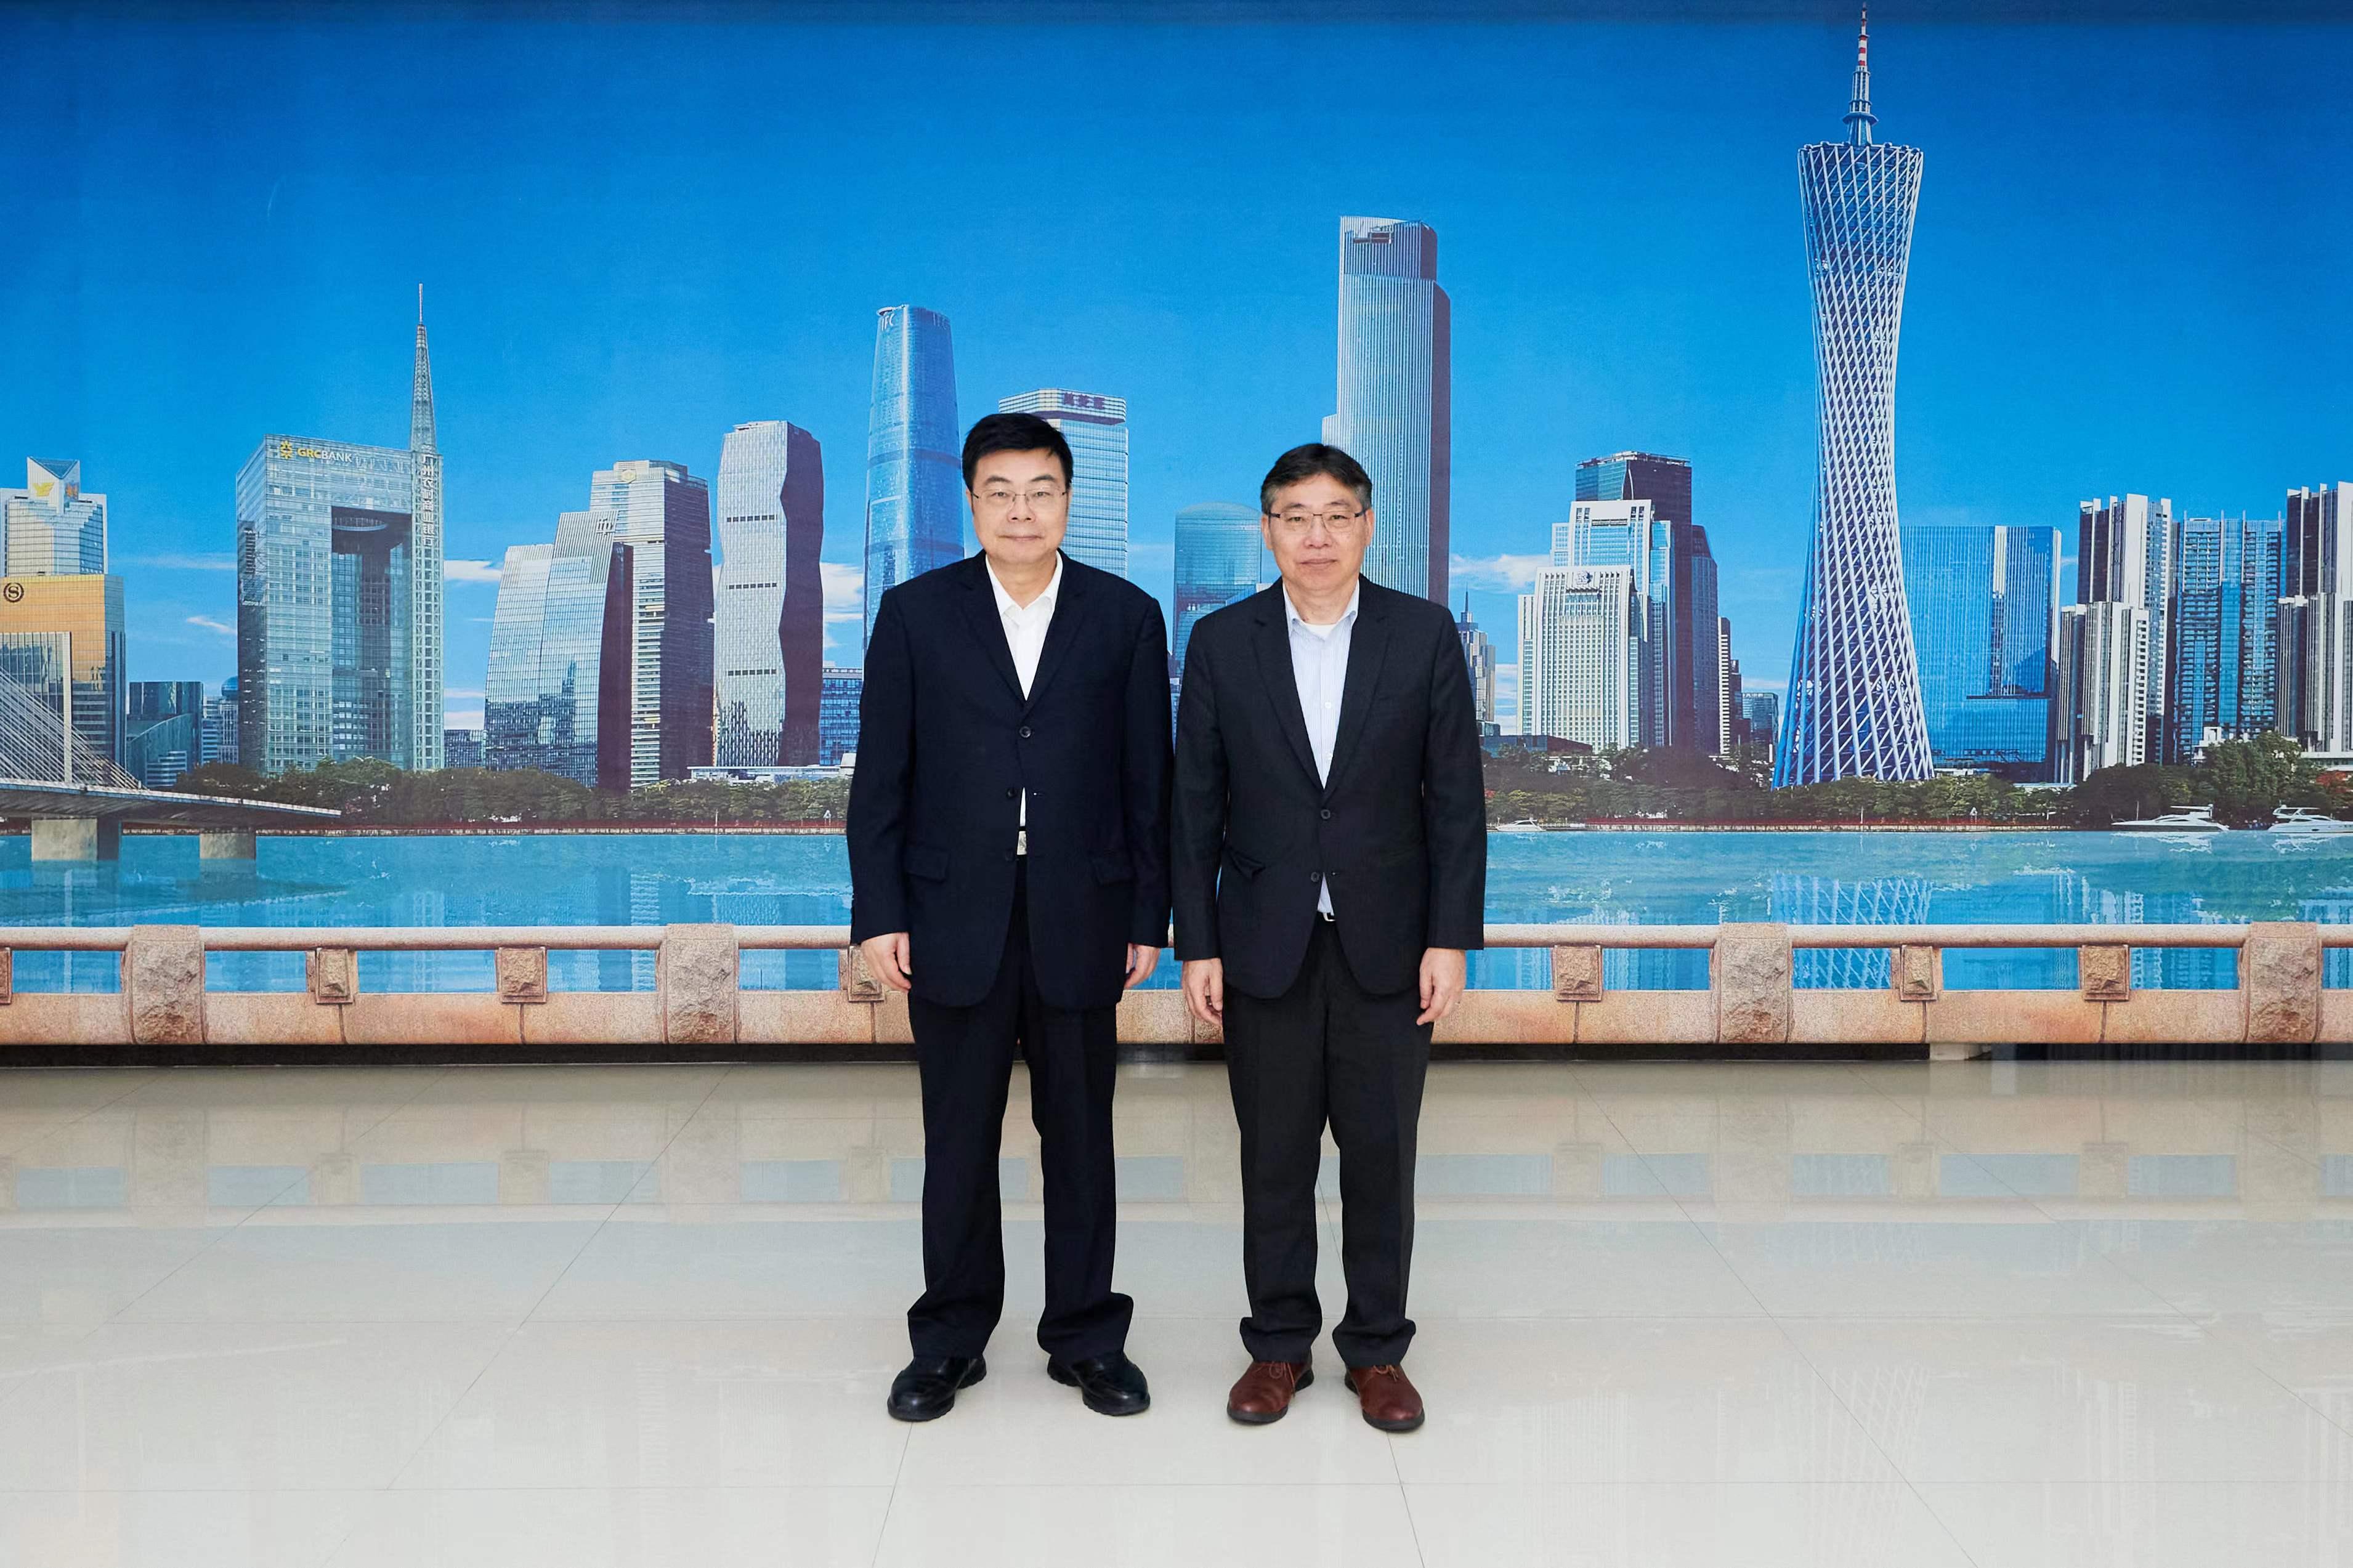 The Secretary for Transport and Logistics, Mr Lam Sai-hung (right), attended a meeting of the task force for collaboration on Guangdong-Hong Kong transportation in Guangzhou yesterday (June 4). Mr Lam is pictured with Permanent Deputy Director-General of the Guangdong Provincial Public Security Department Mr Yang Rihua (left) before the meeting. 